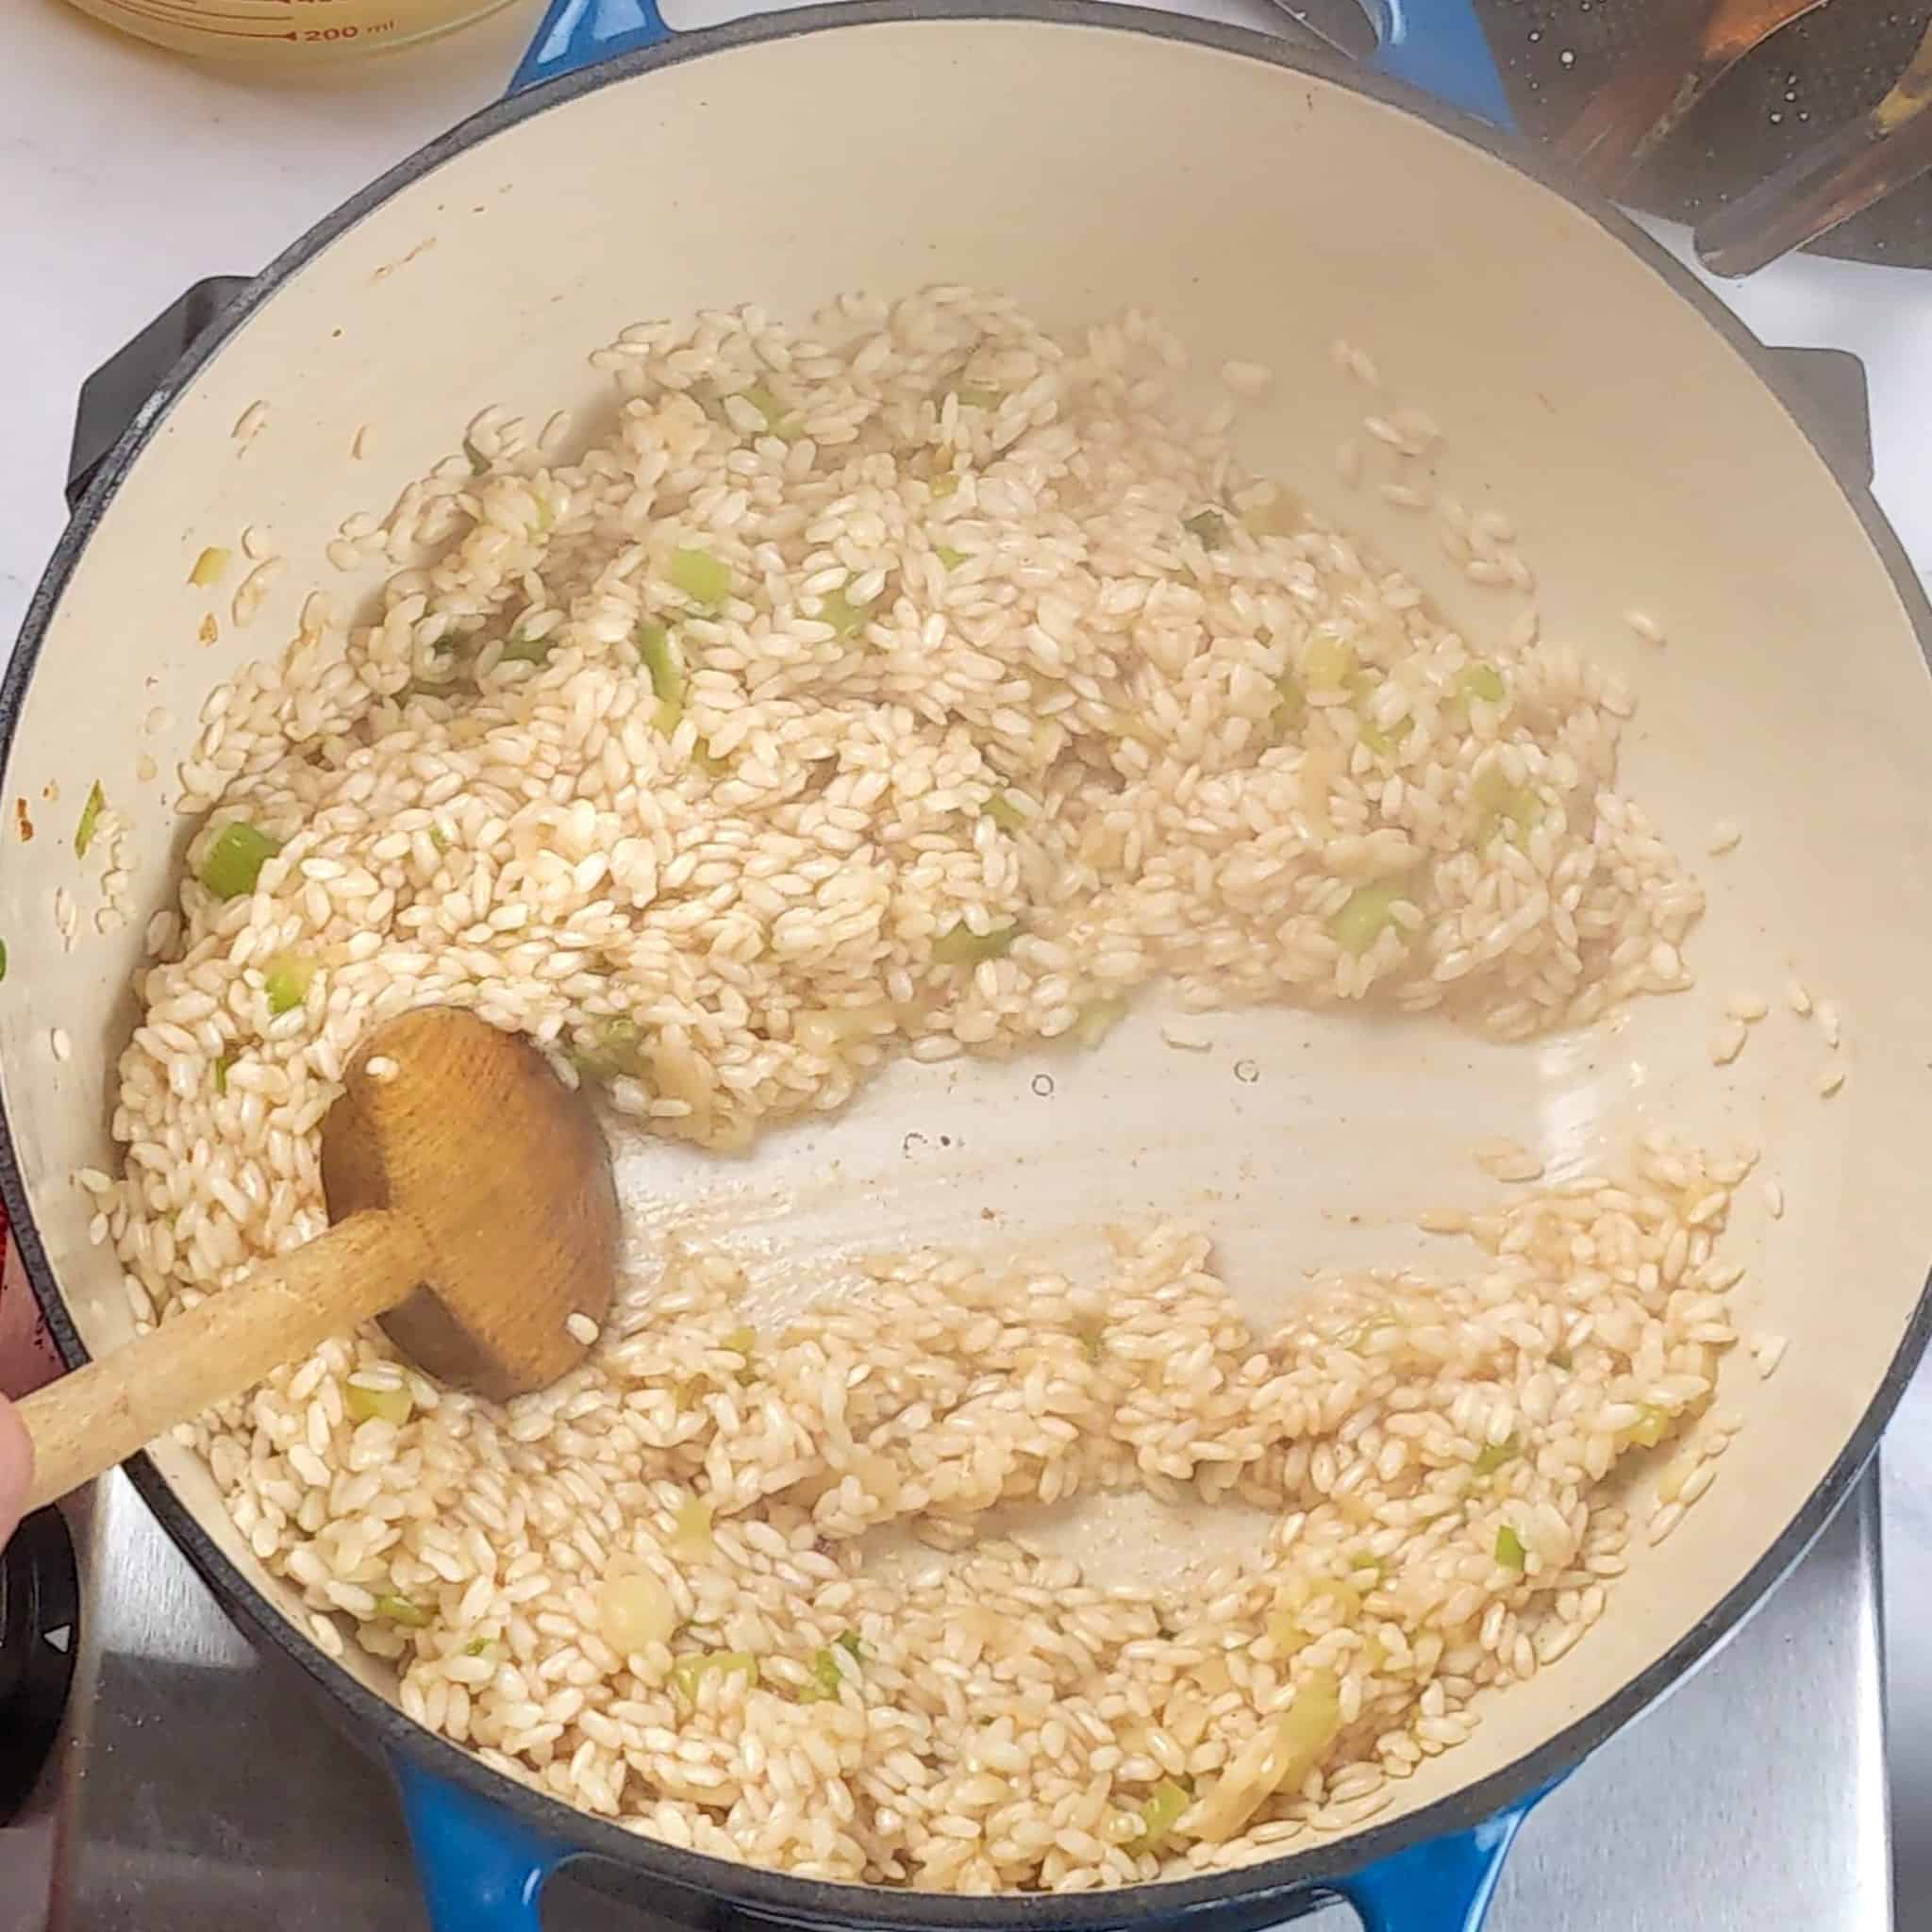 half way cooked risotto in a dutch oven with a wooden spoon split the risotto in the center